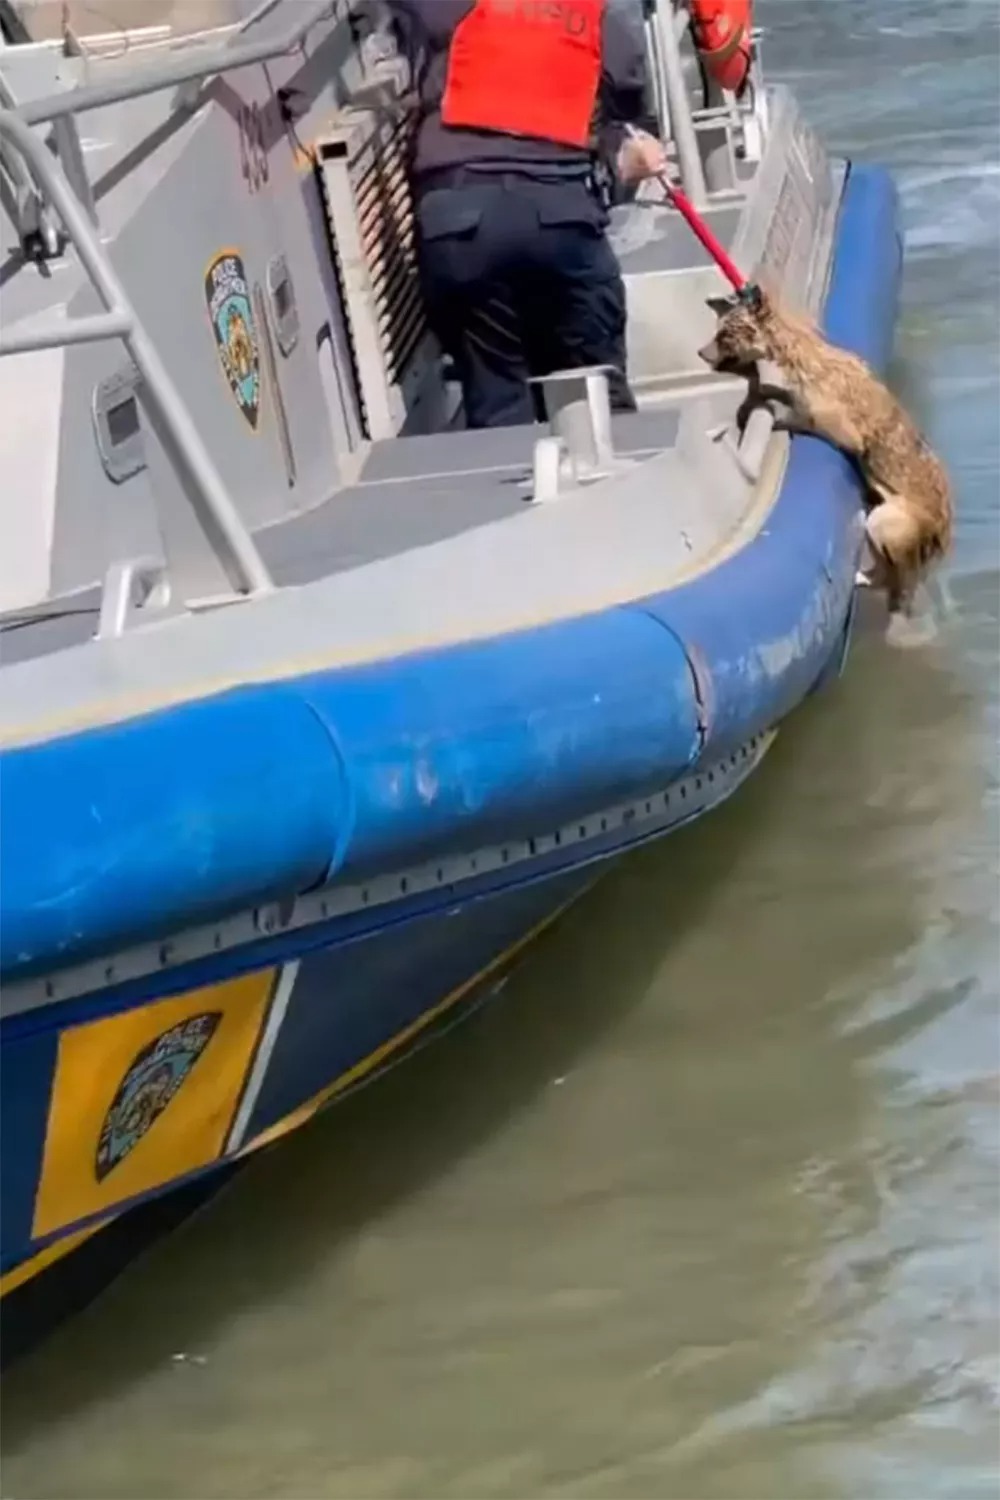 New York City Police Successfully Rescued a "Distressed" Coyote from The East River